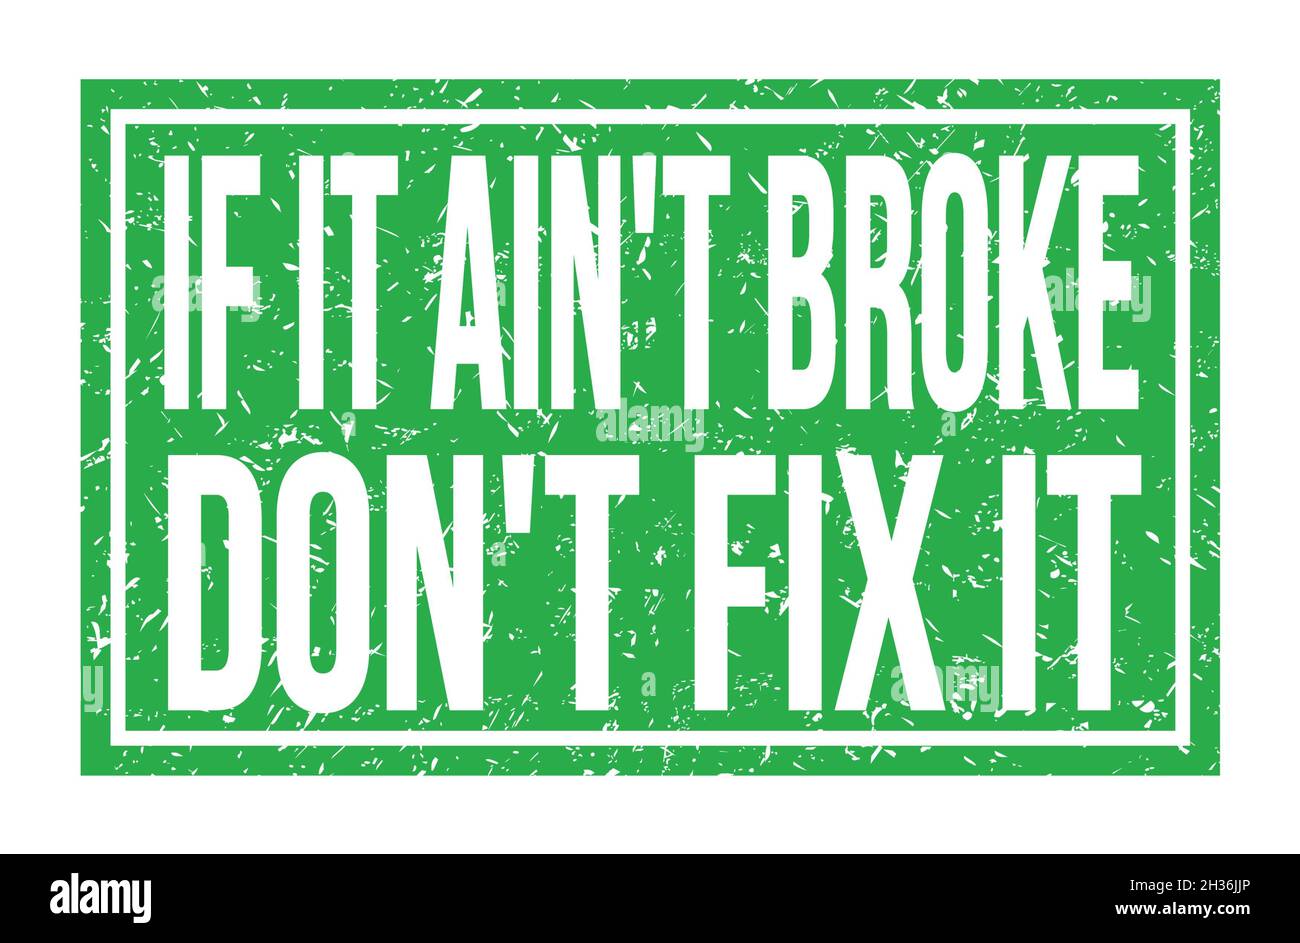 IF IT AIN'T BROKE DON'T FIX IT, words written on green rectangle stamp sign Stock Photo